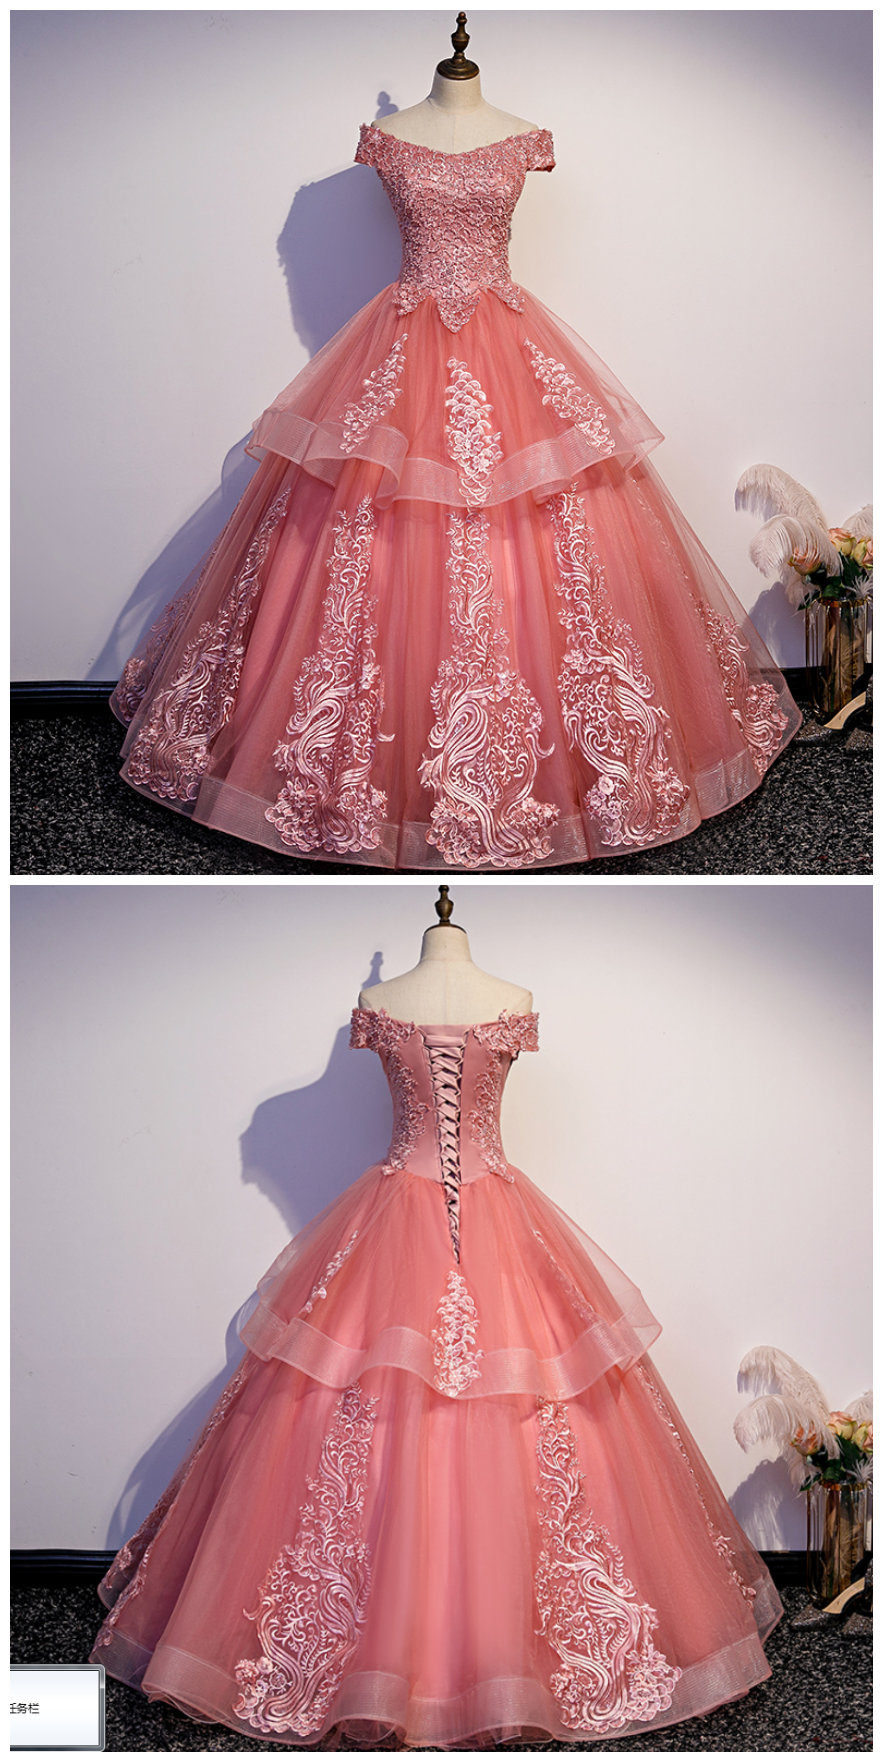 Glam Tulle Layers Ball Gown Princess Party Dress, Sweet 16 Dresses